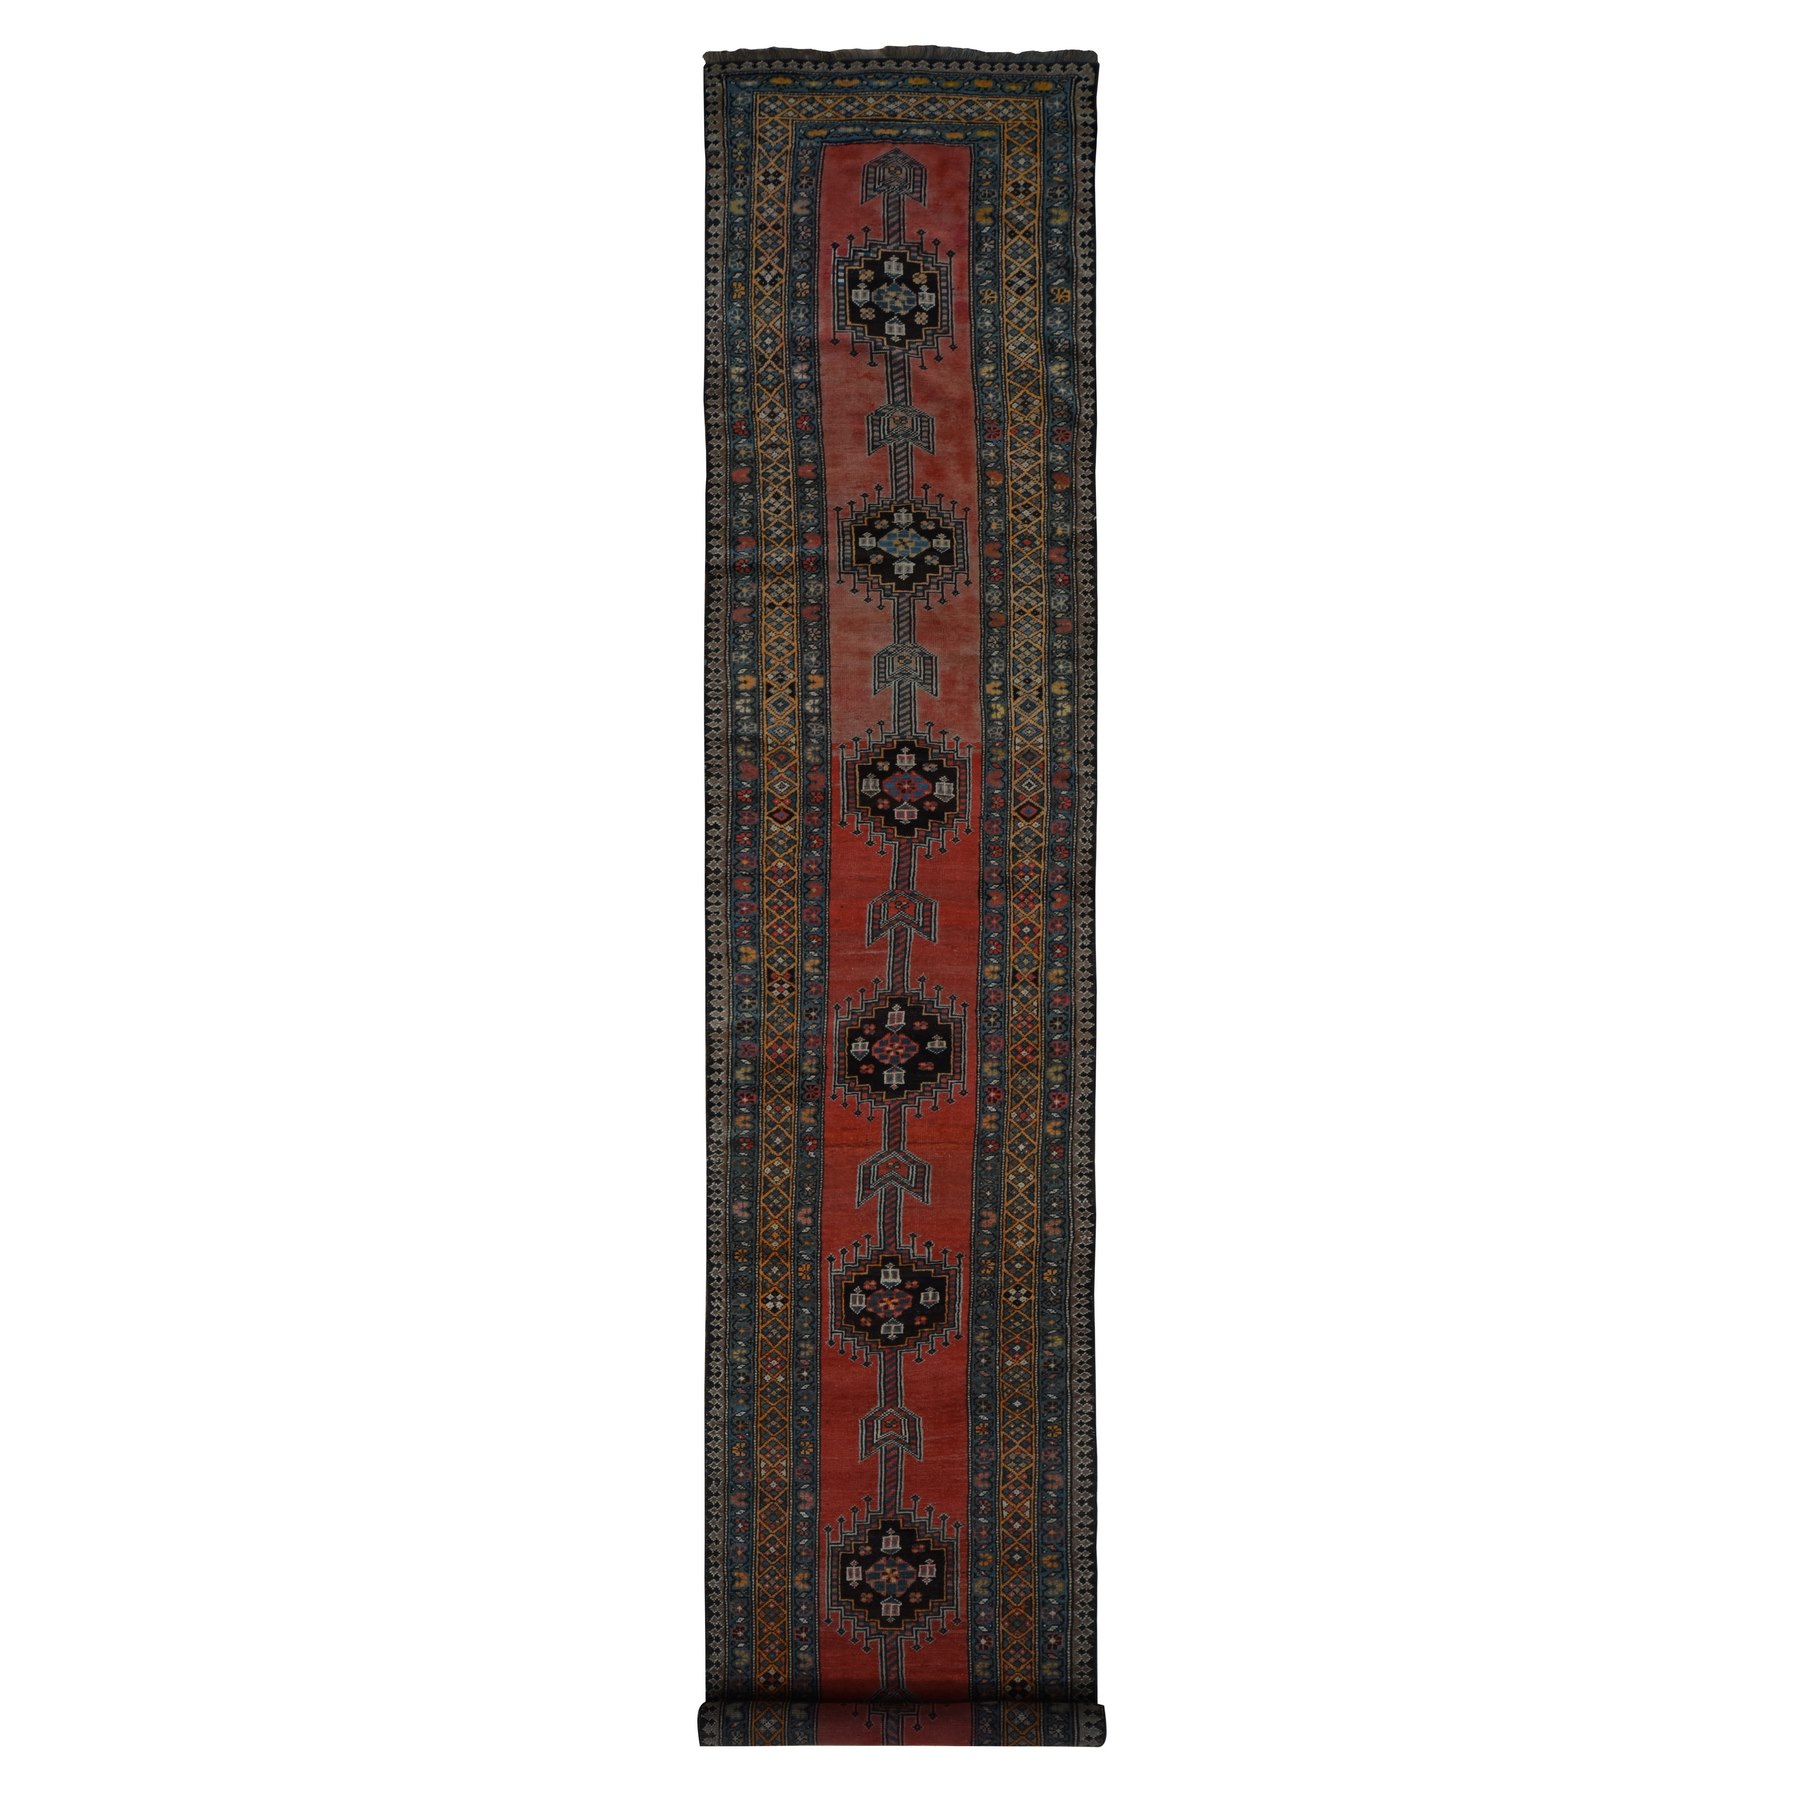 Antique-Hand-Knotted-Rug-390830